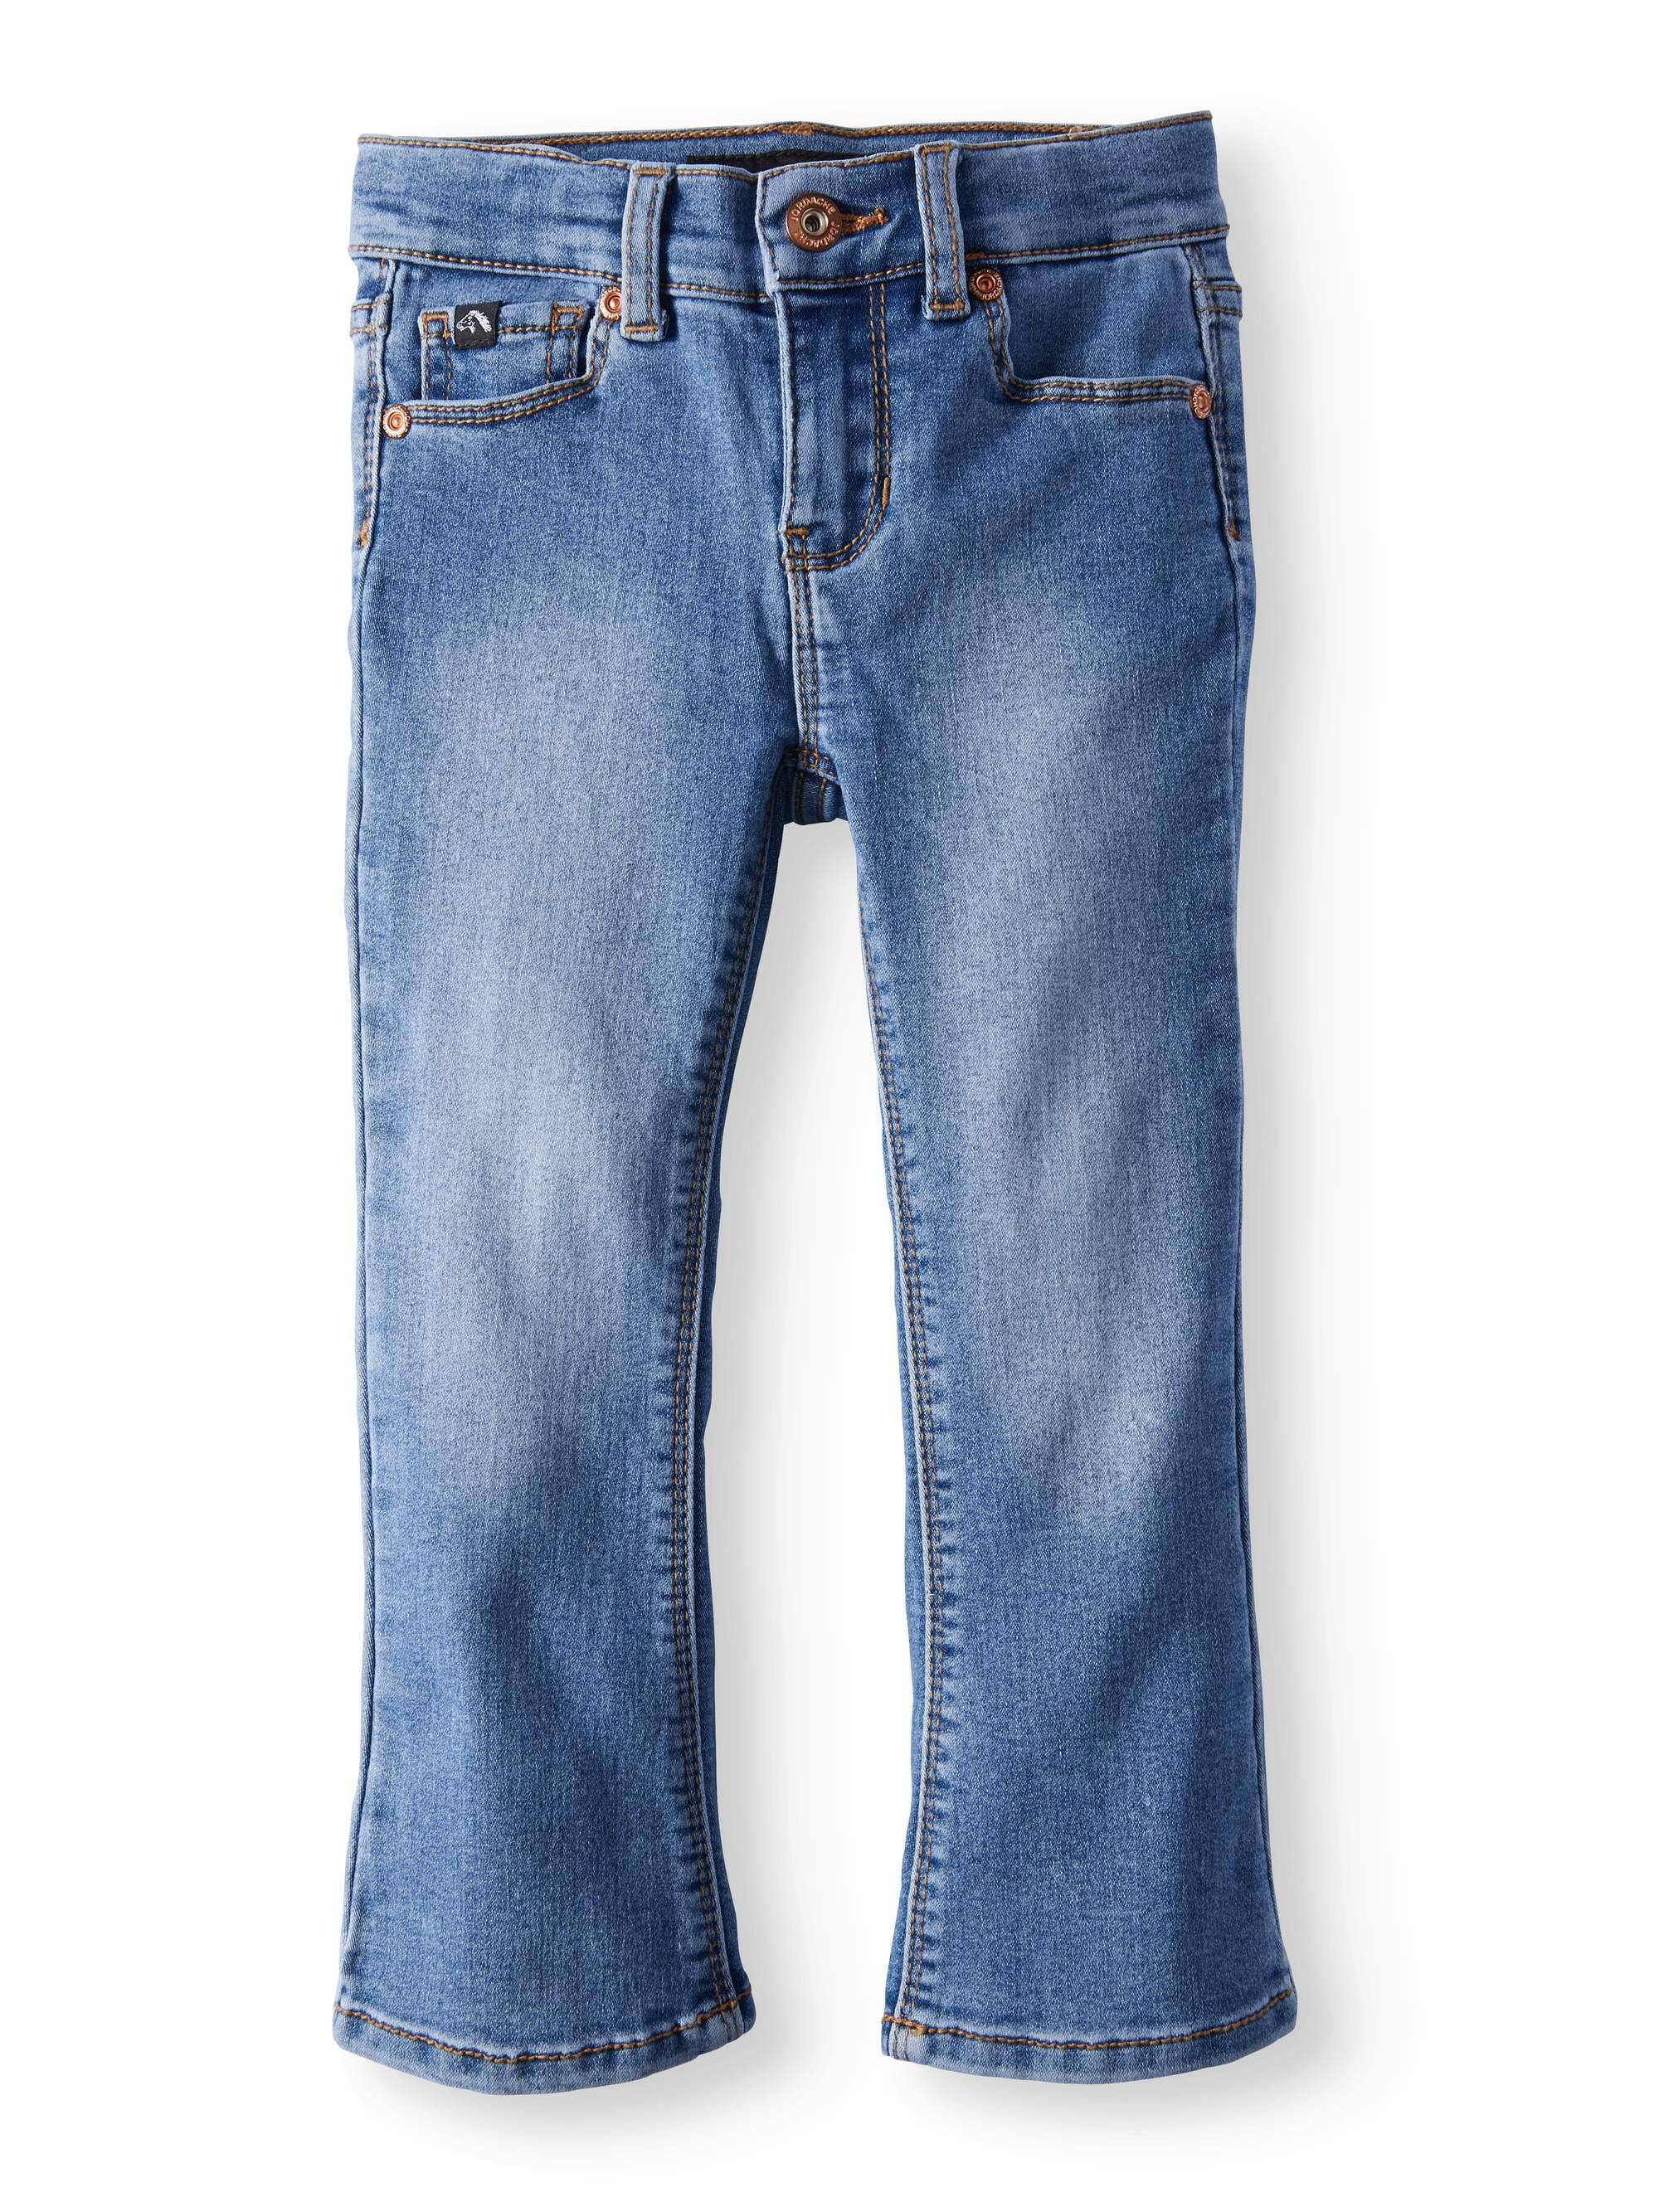 3t bootcut jeans